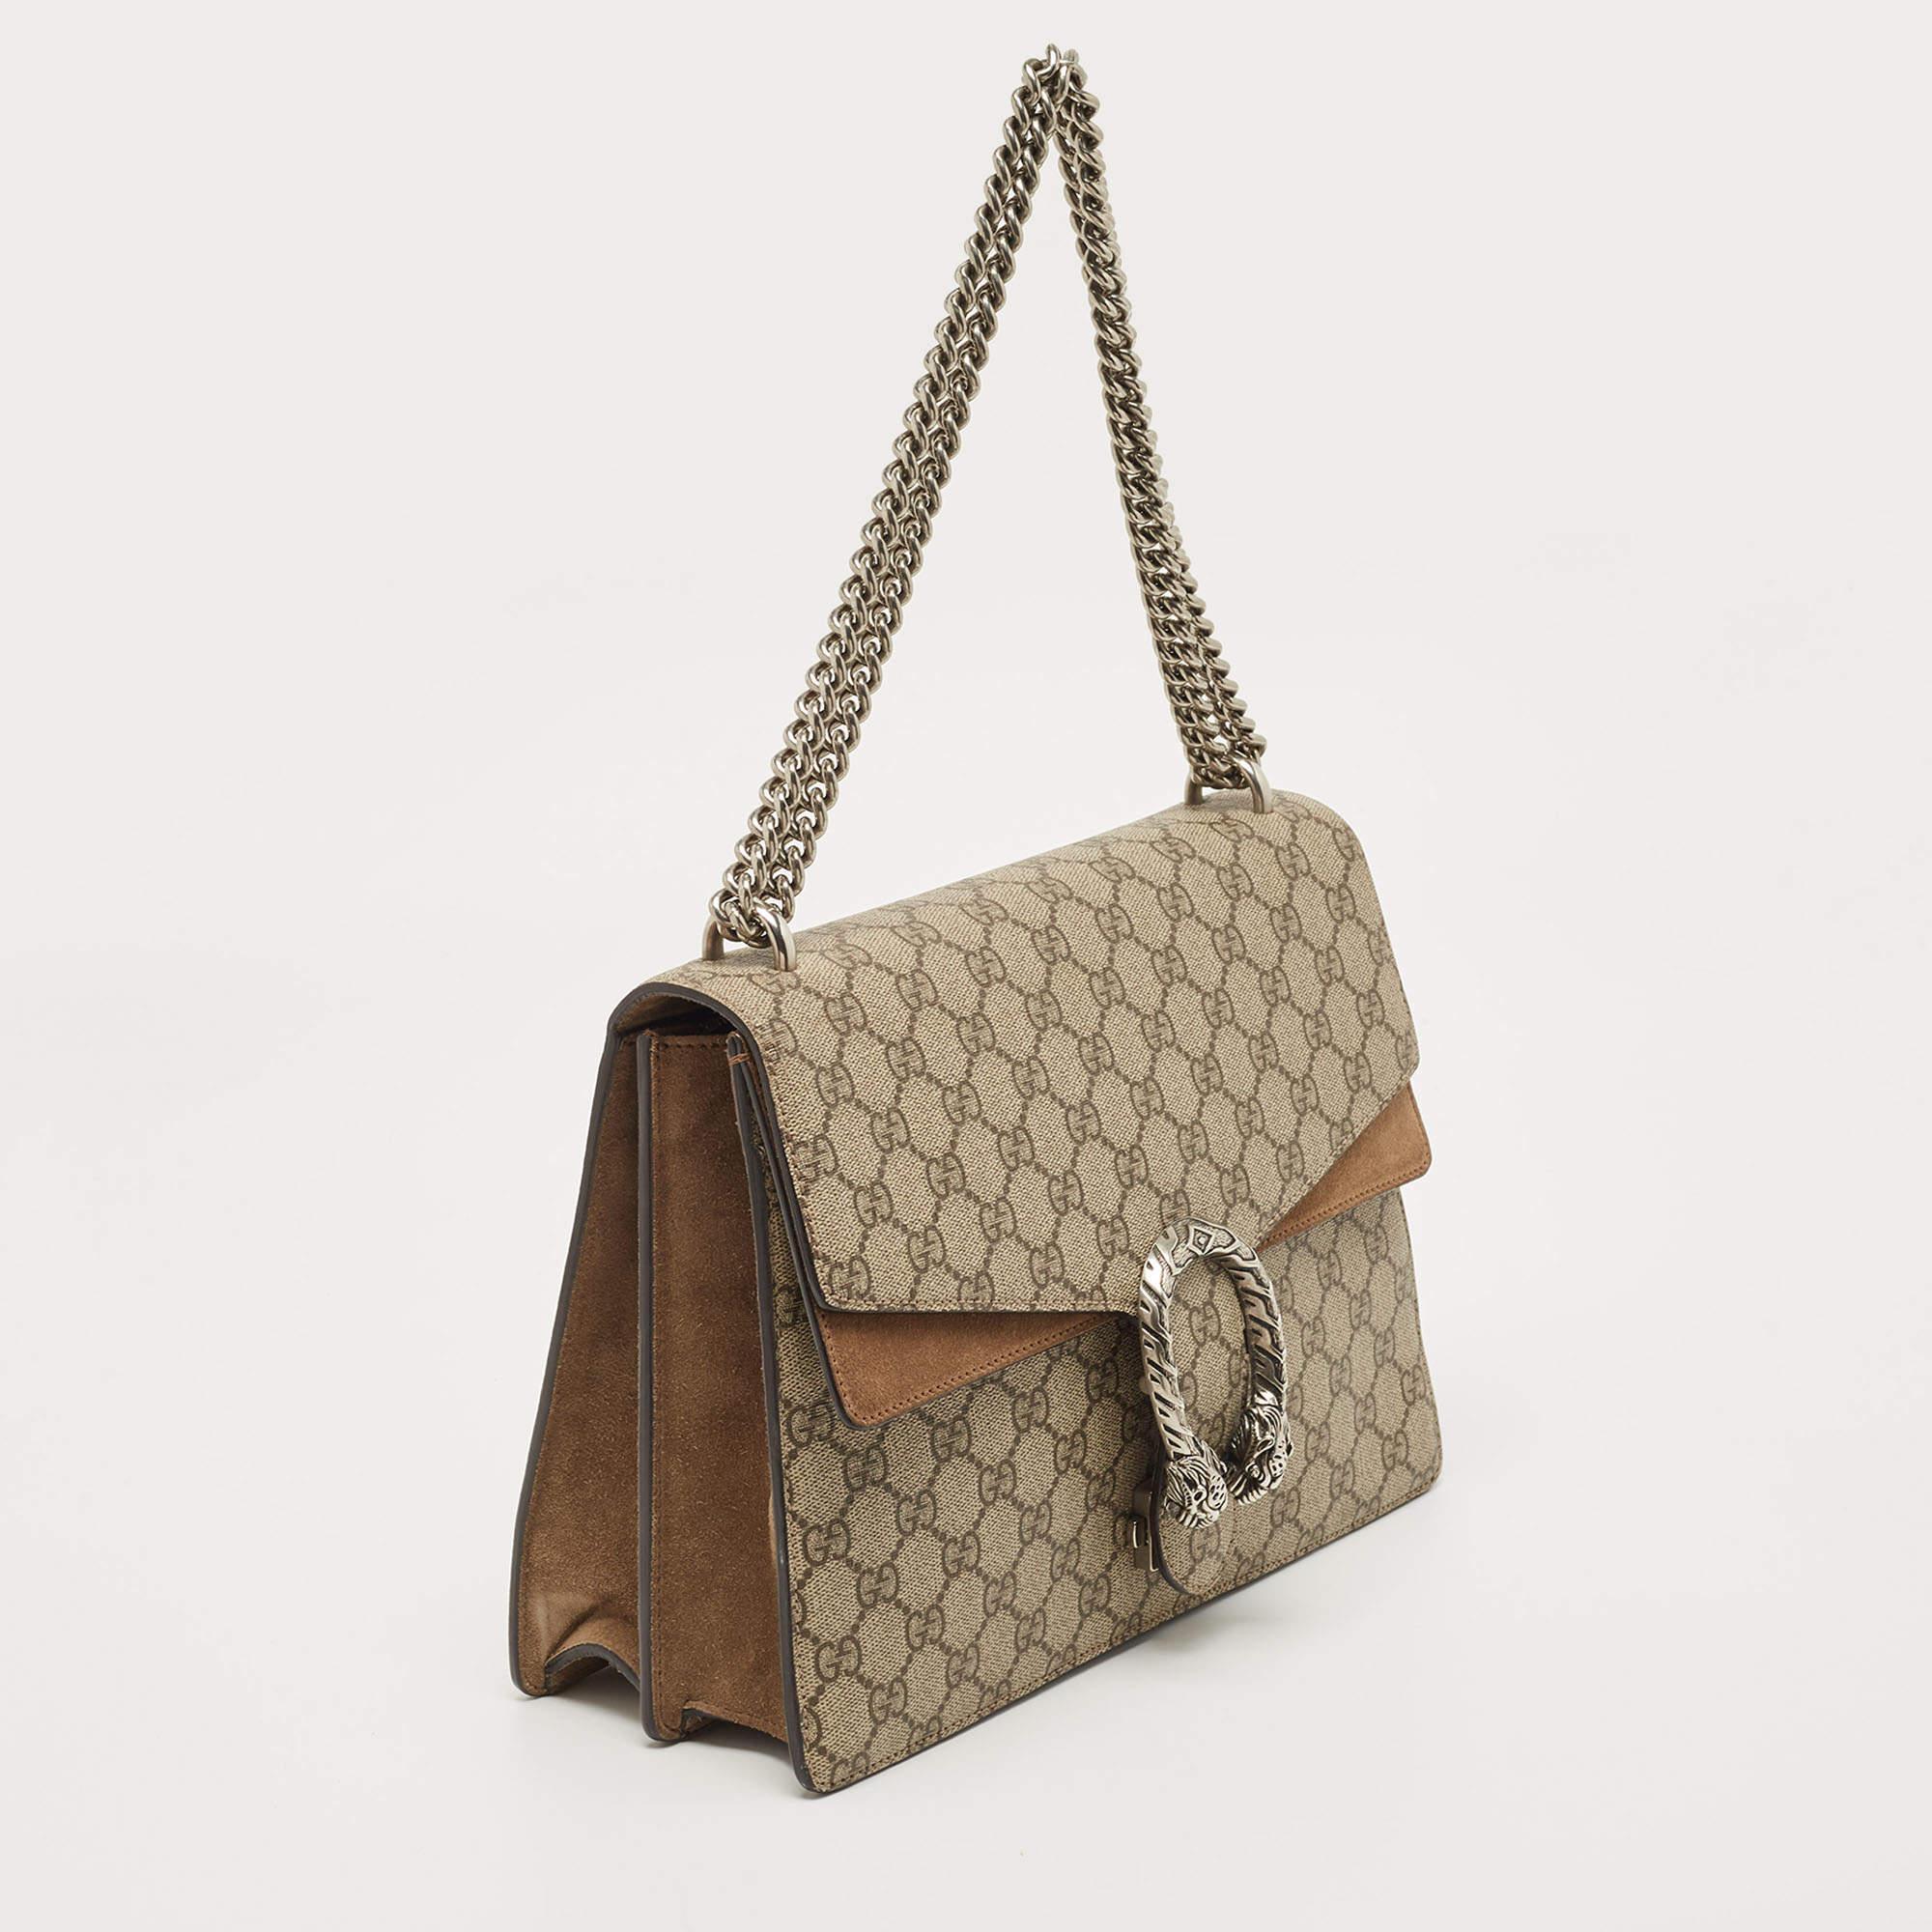 Crafted from quality materials, your wardrobe is missing out on this beautifully made Gucci Dionysus Blooms bag. Look your fashionable best in any outfit with this stylish bag that promises to elevate your ensemble.

